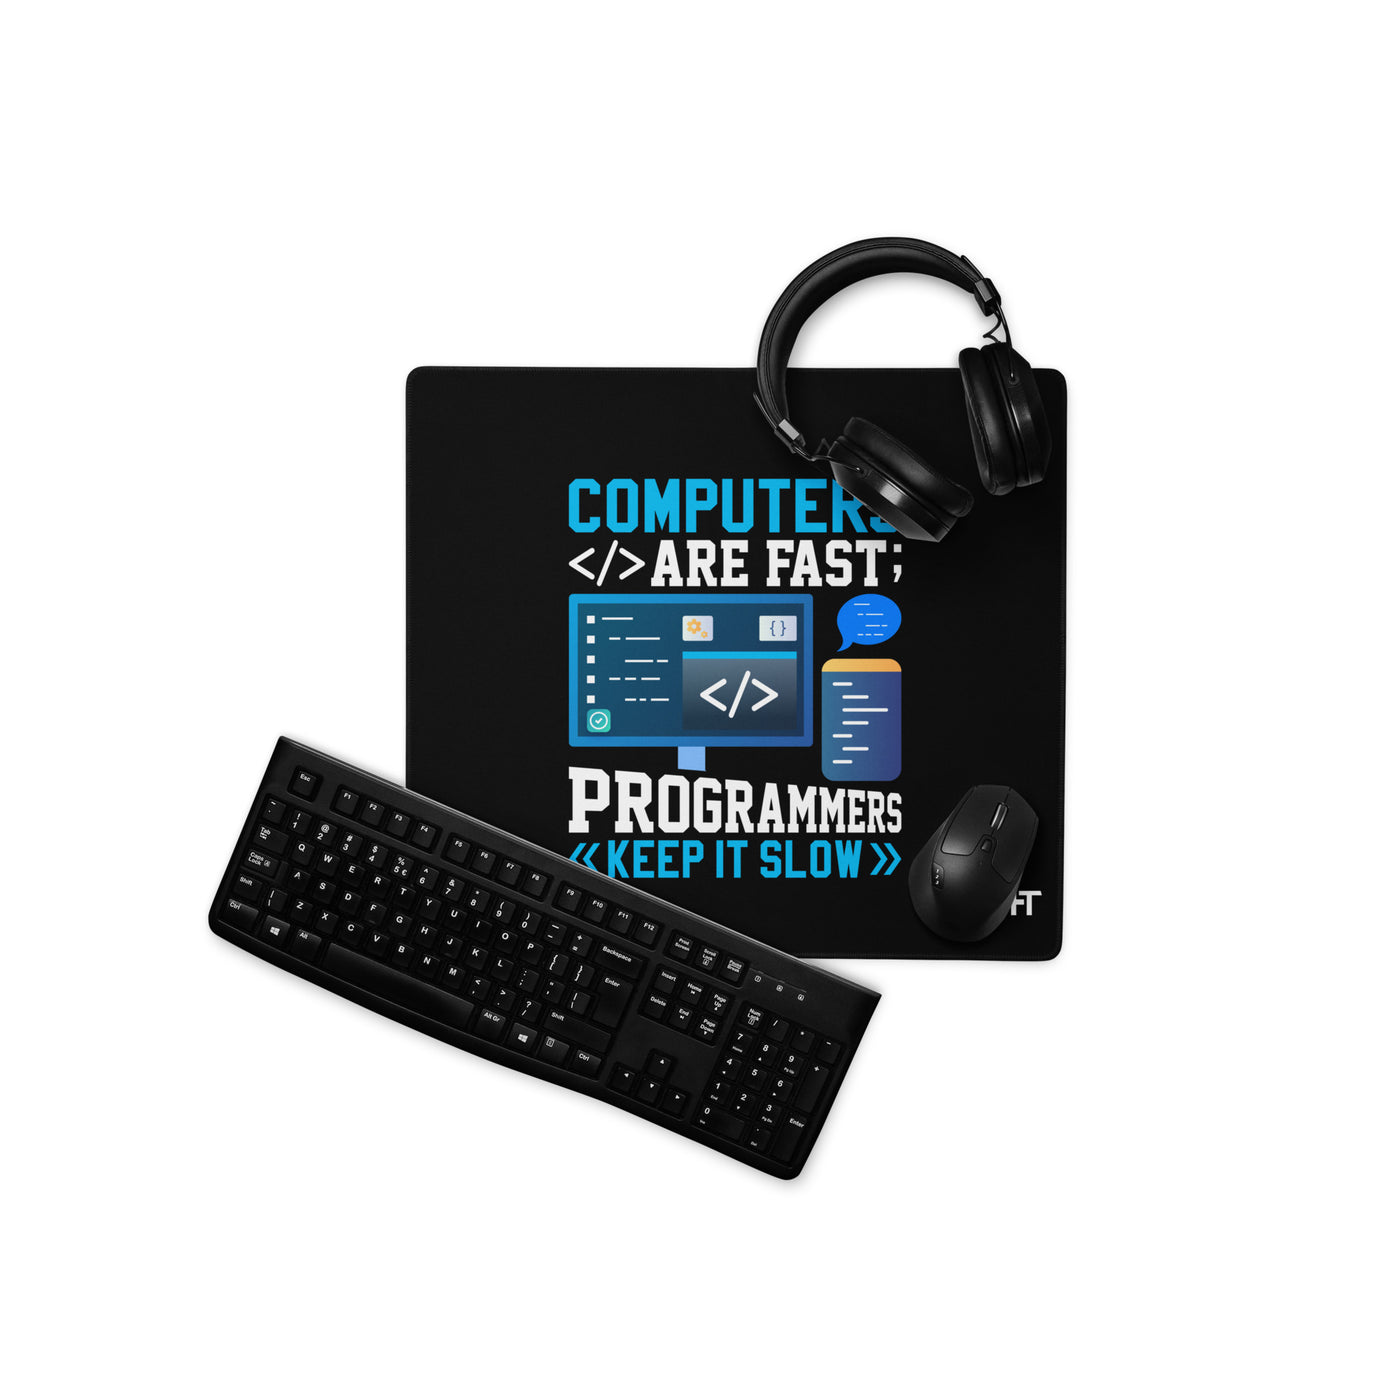 Computers are fast - Blue RK Desk Mat